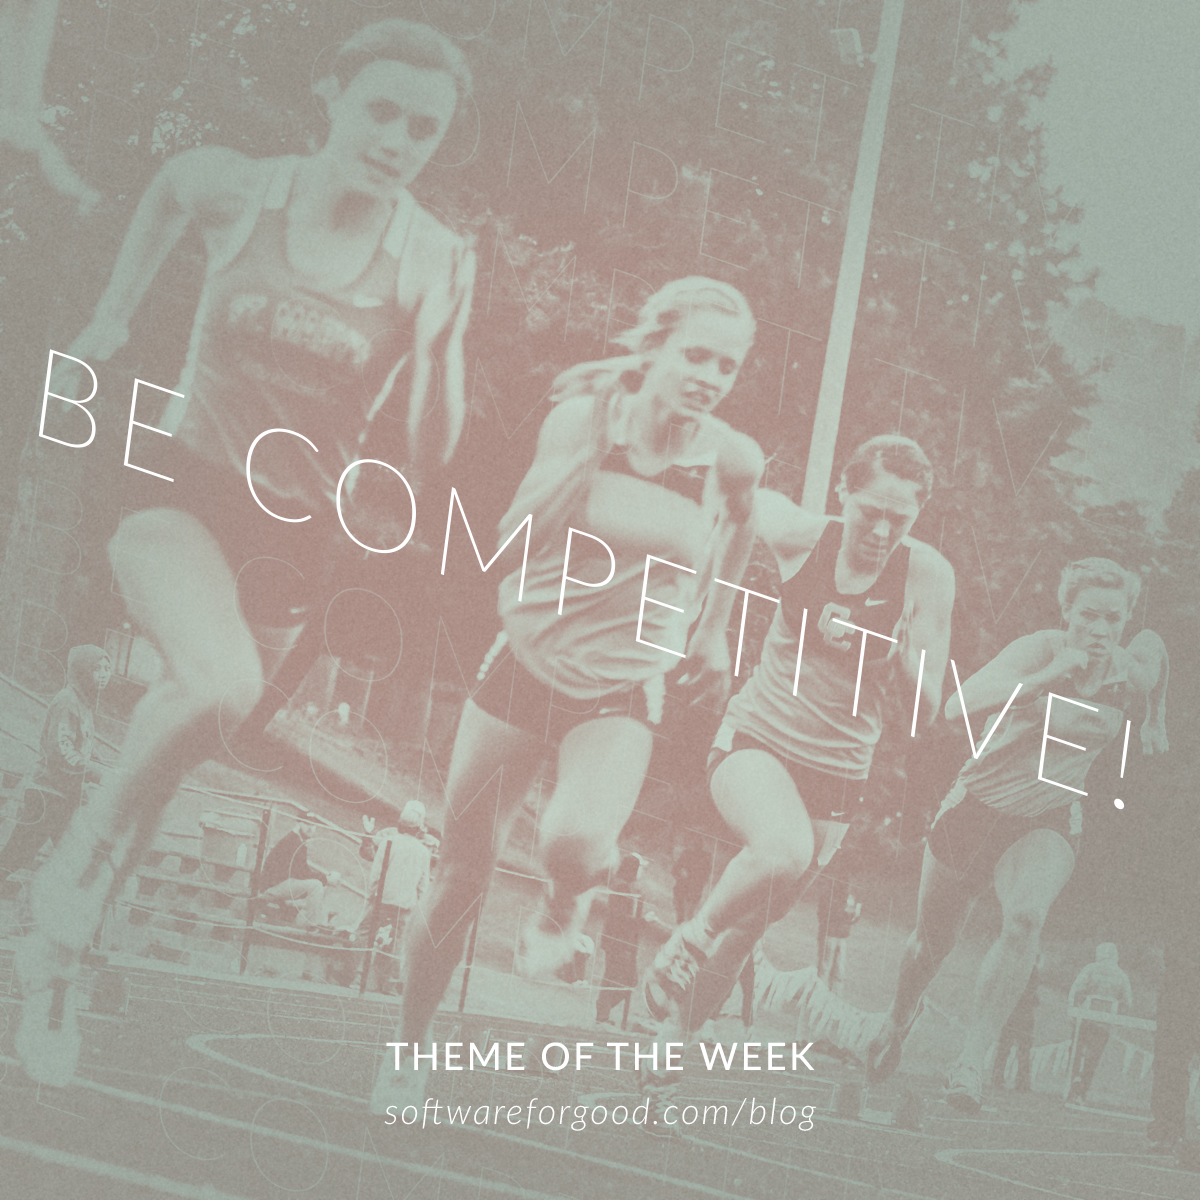 Be Competitive!